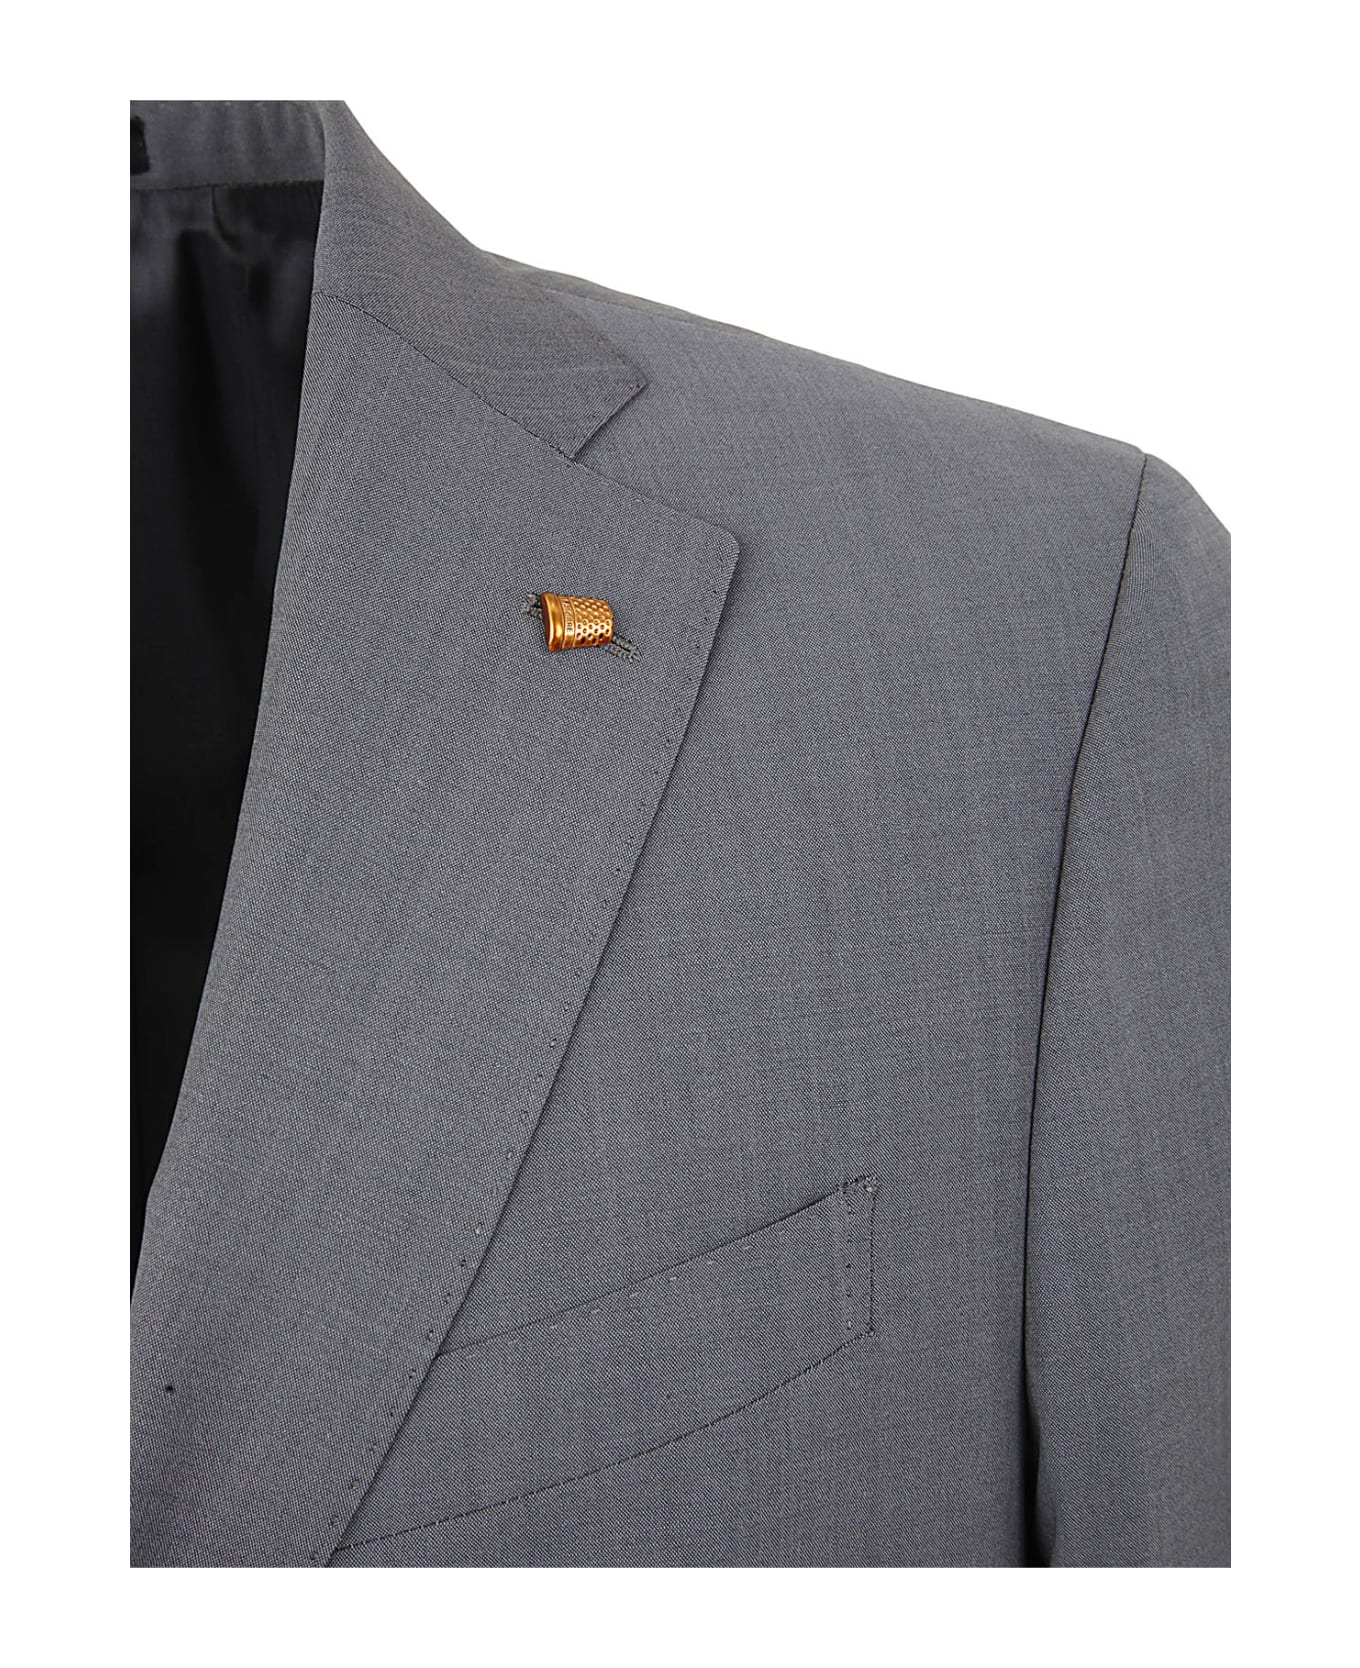 Sartoria Latorre Suit With Two Buttons - Lead